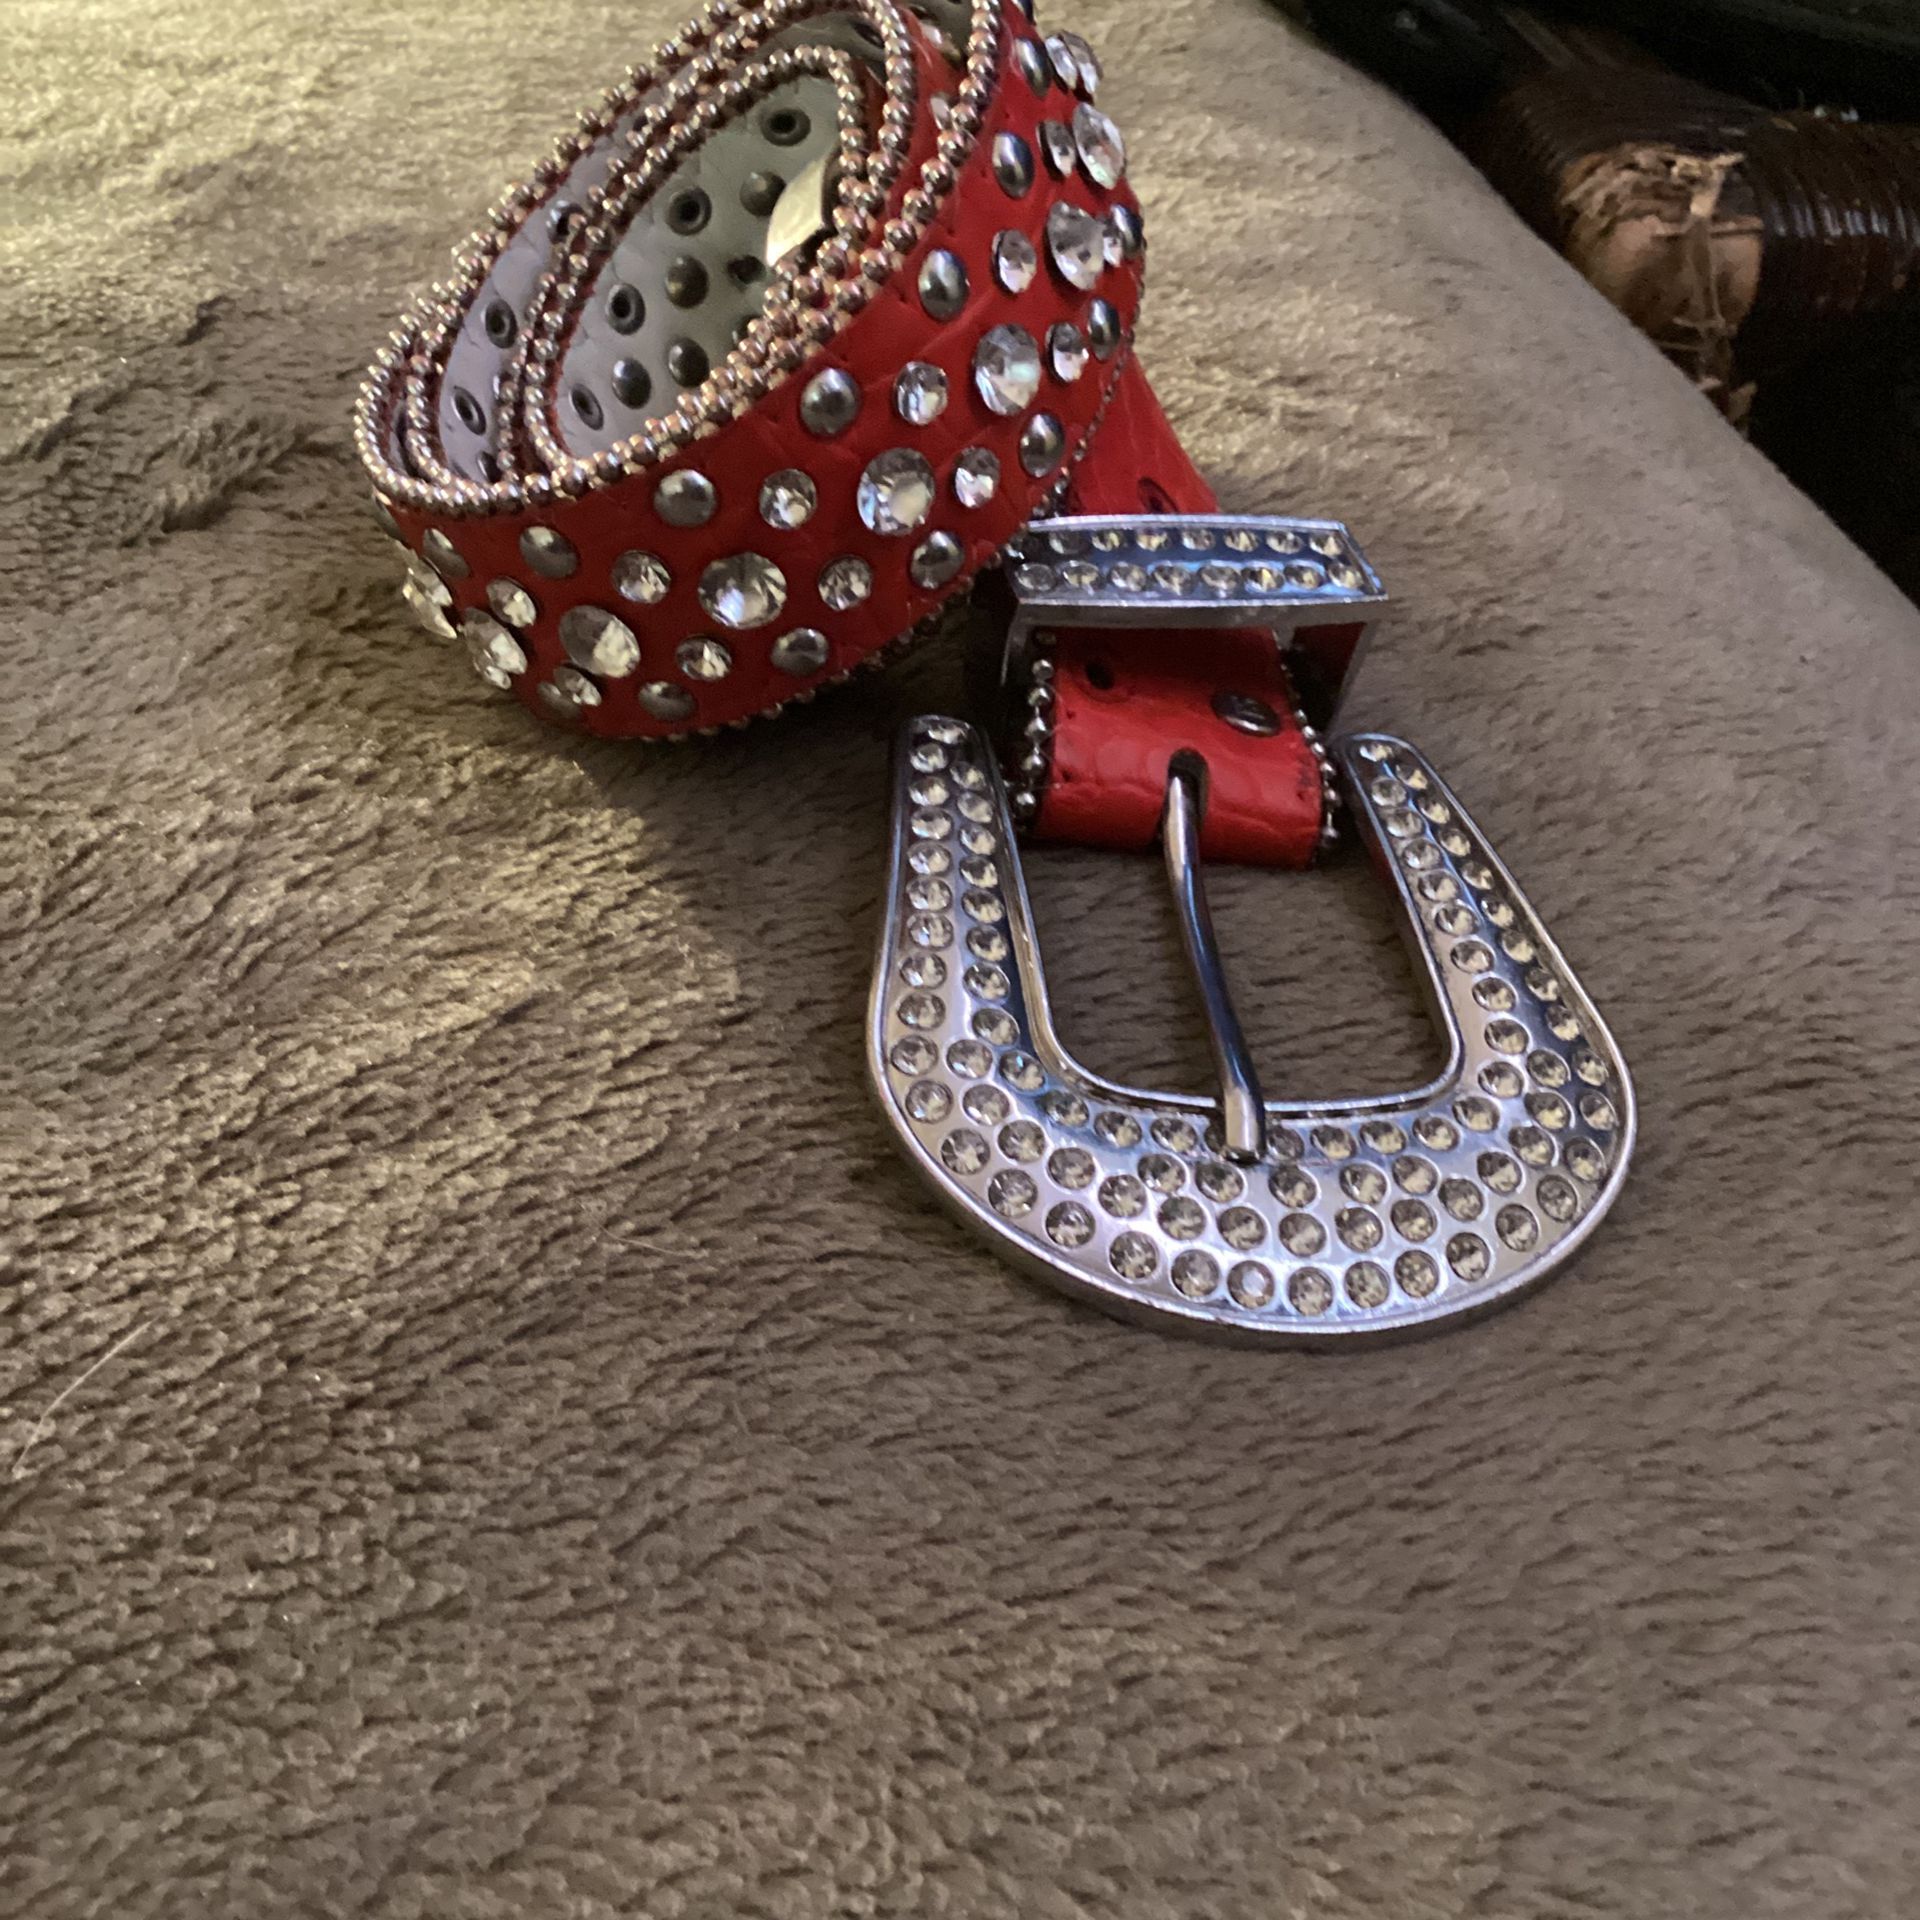 Red Bb.Simon Belt for Sale in Los Angeles, CA - OfferUp